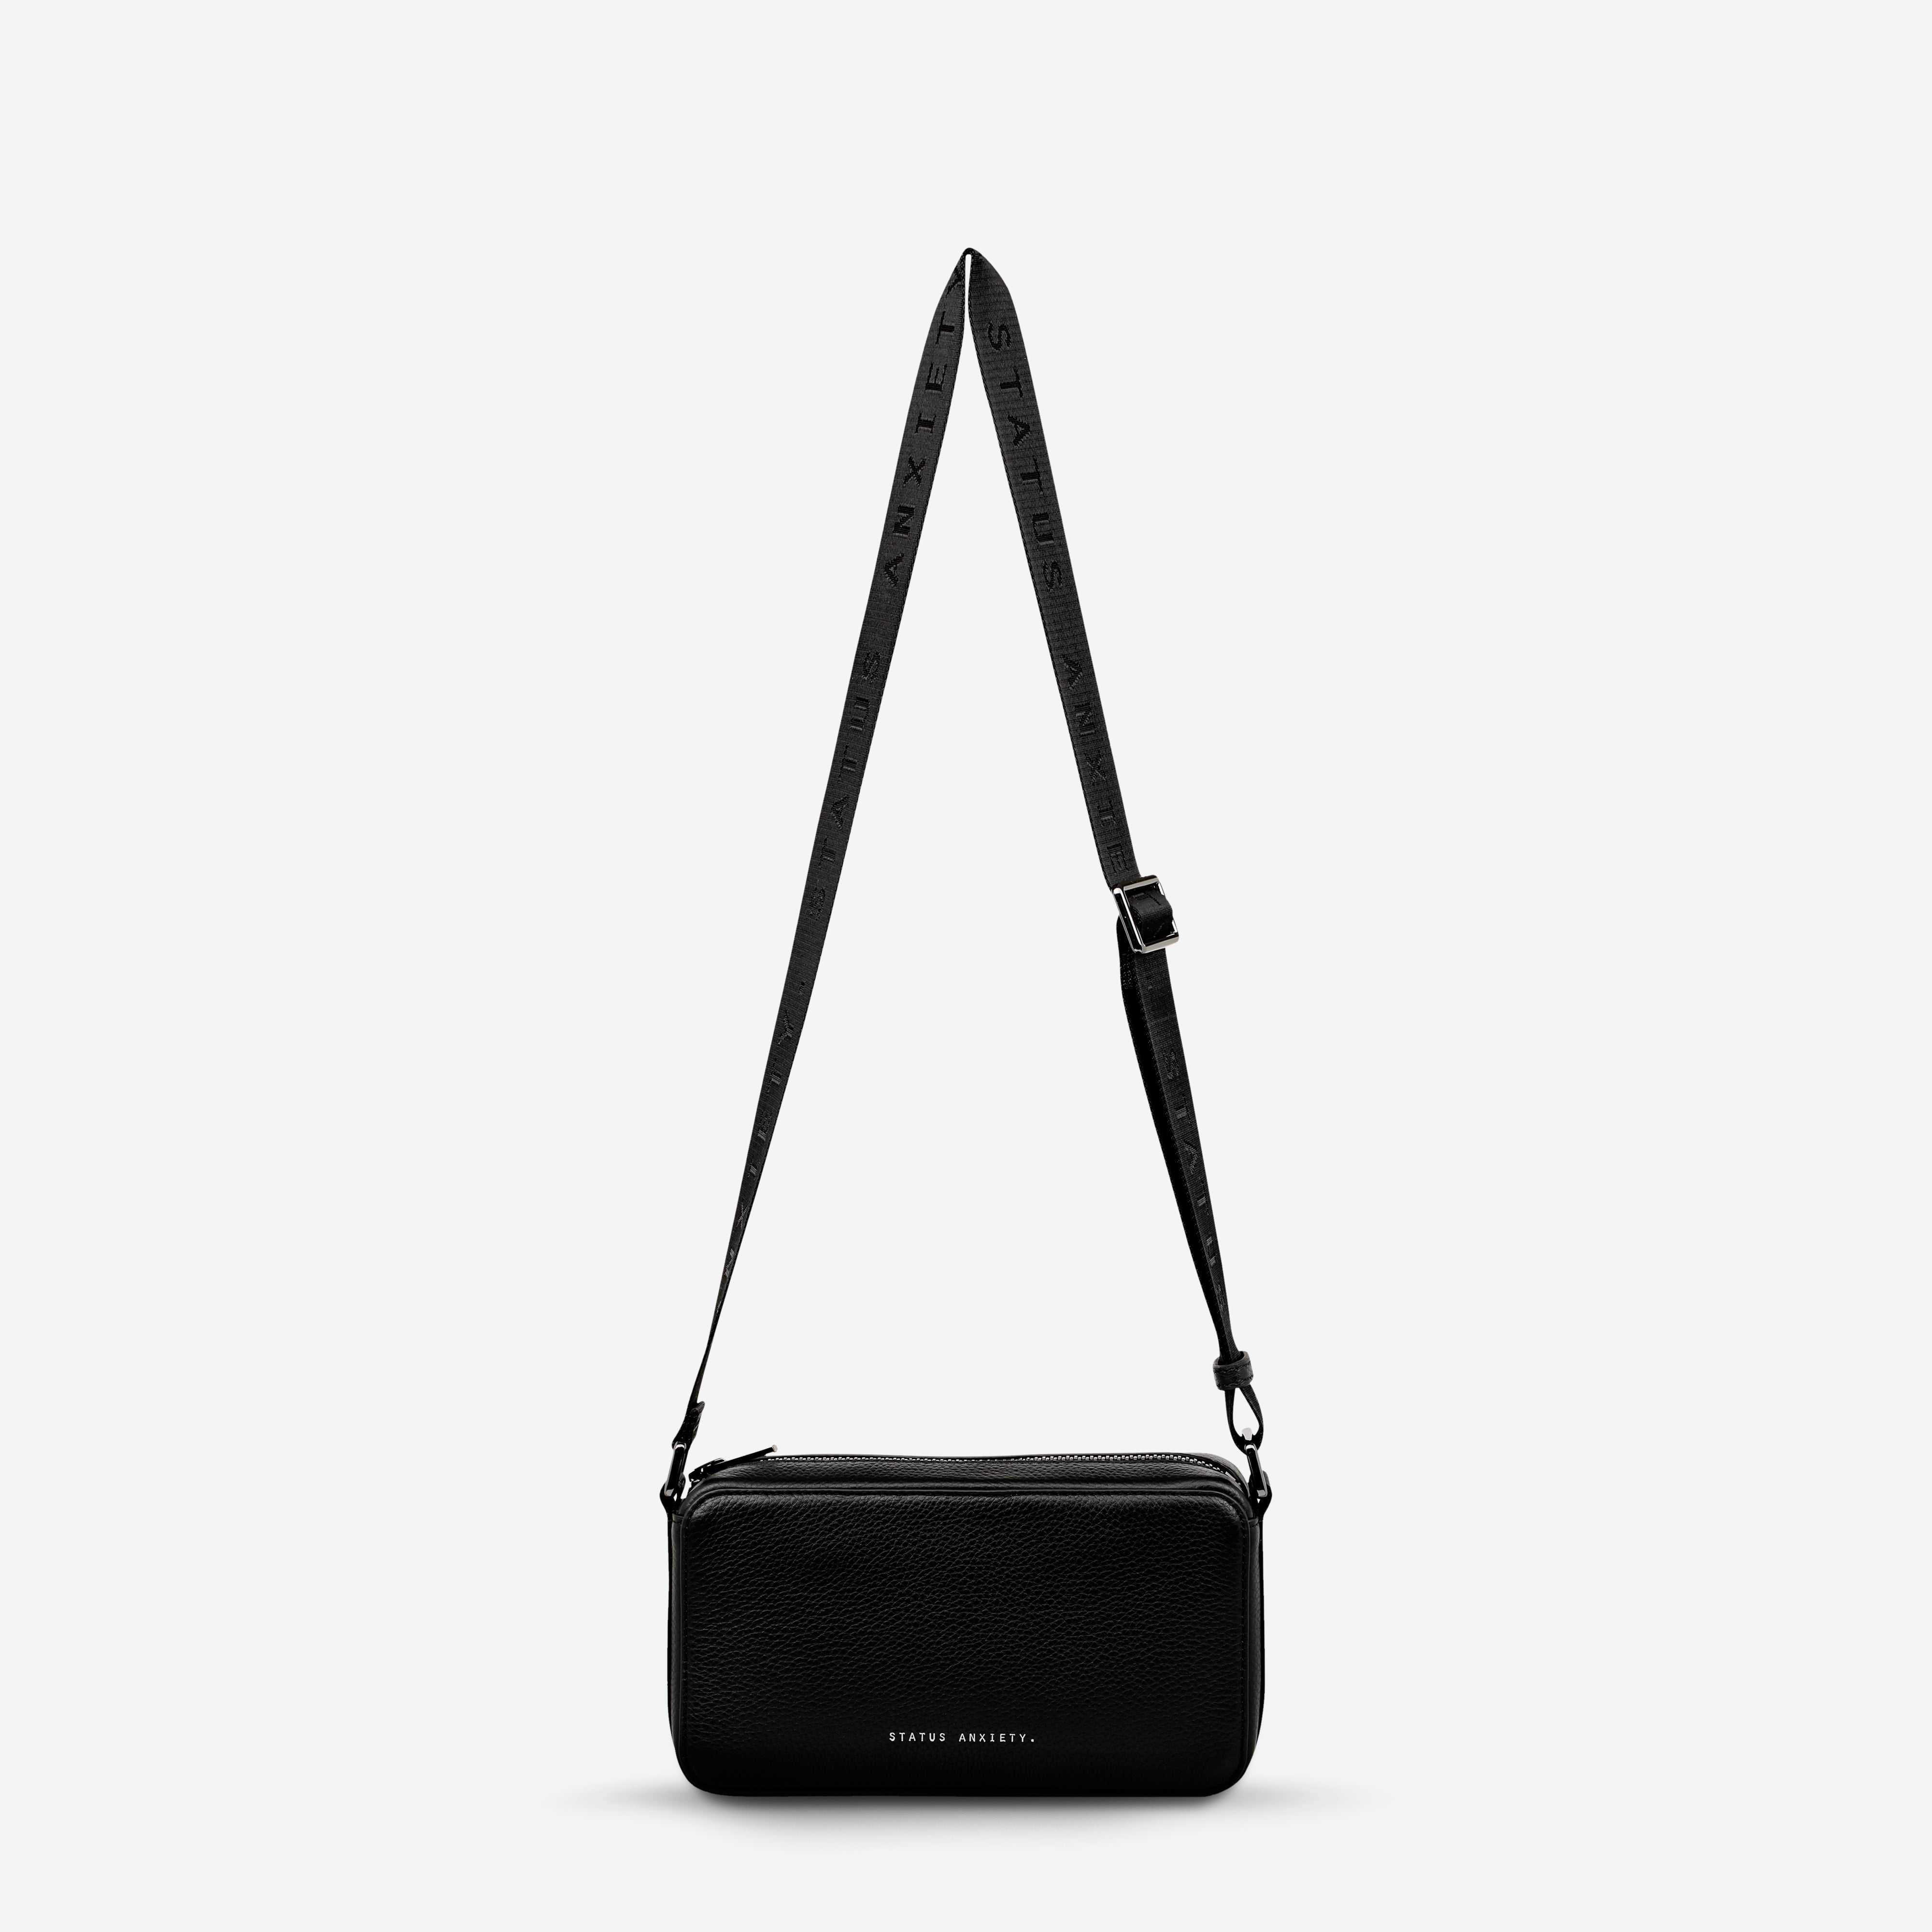 The 20 Best Crossbody Purses to Buy in 2023 - PureWow